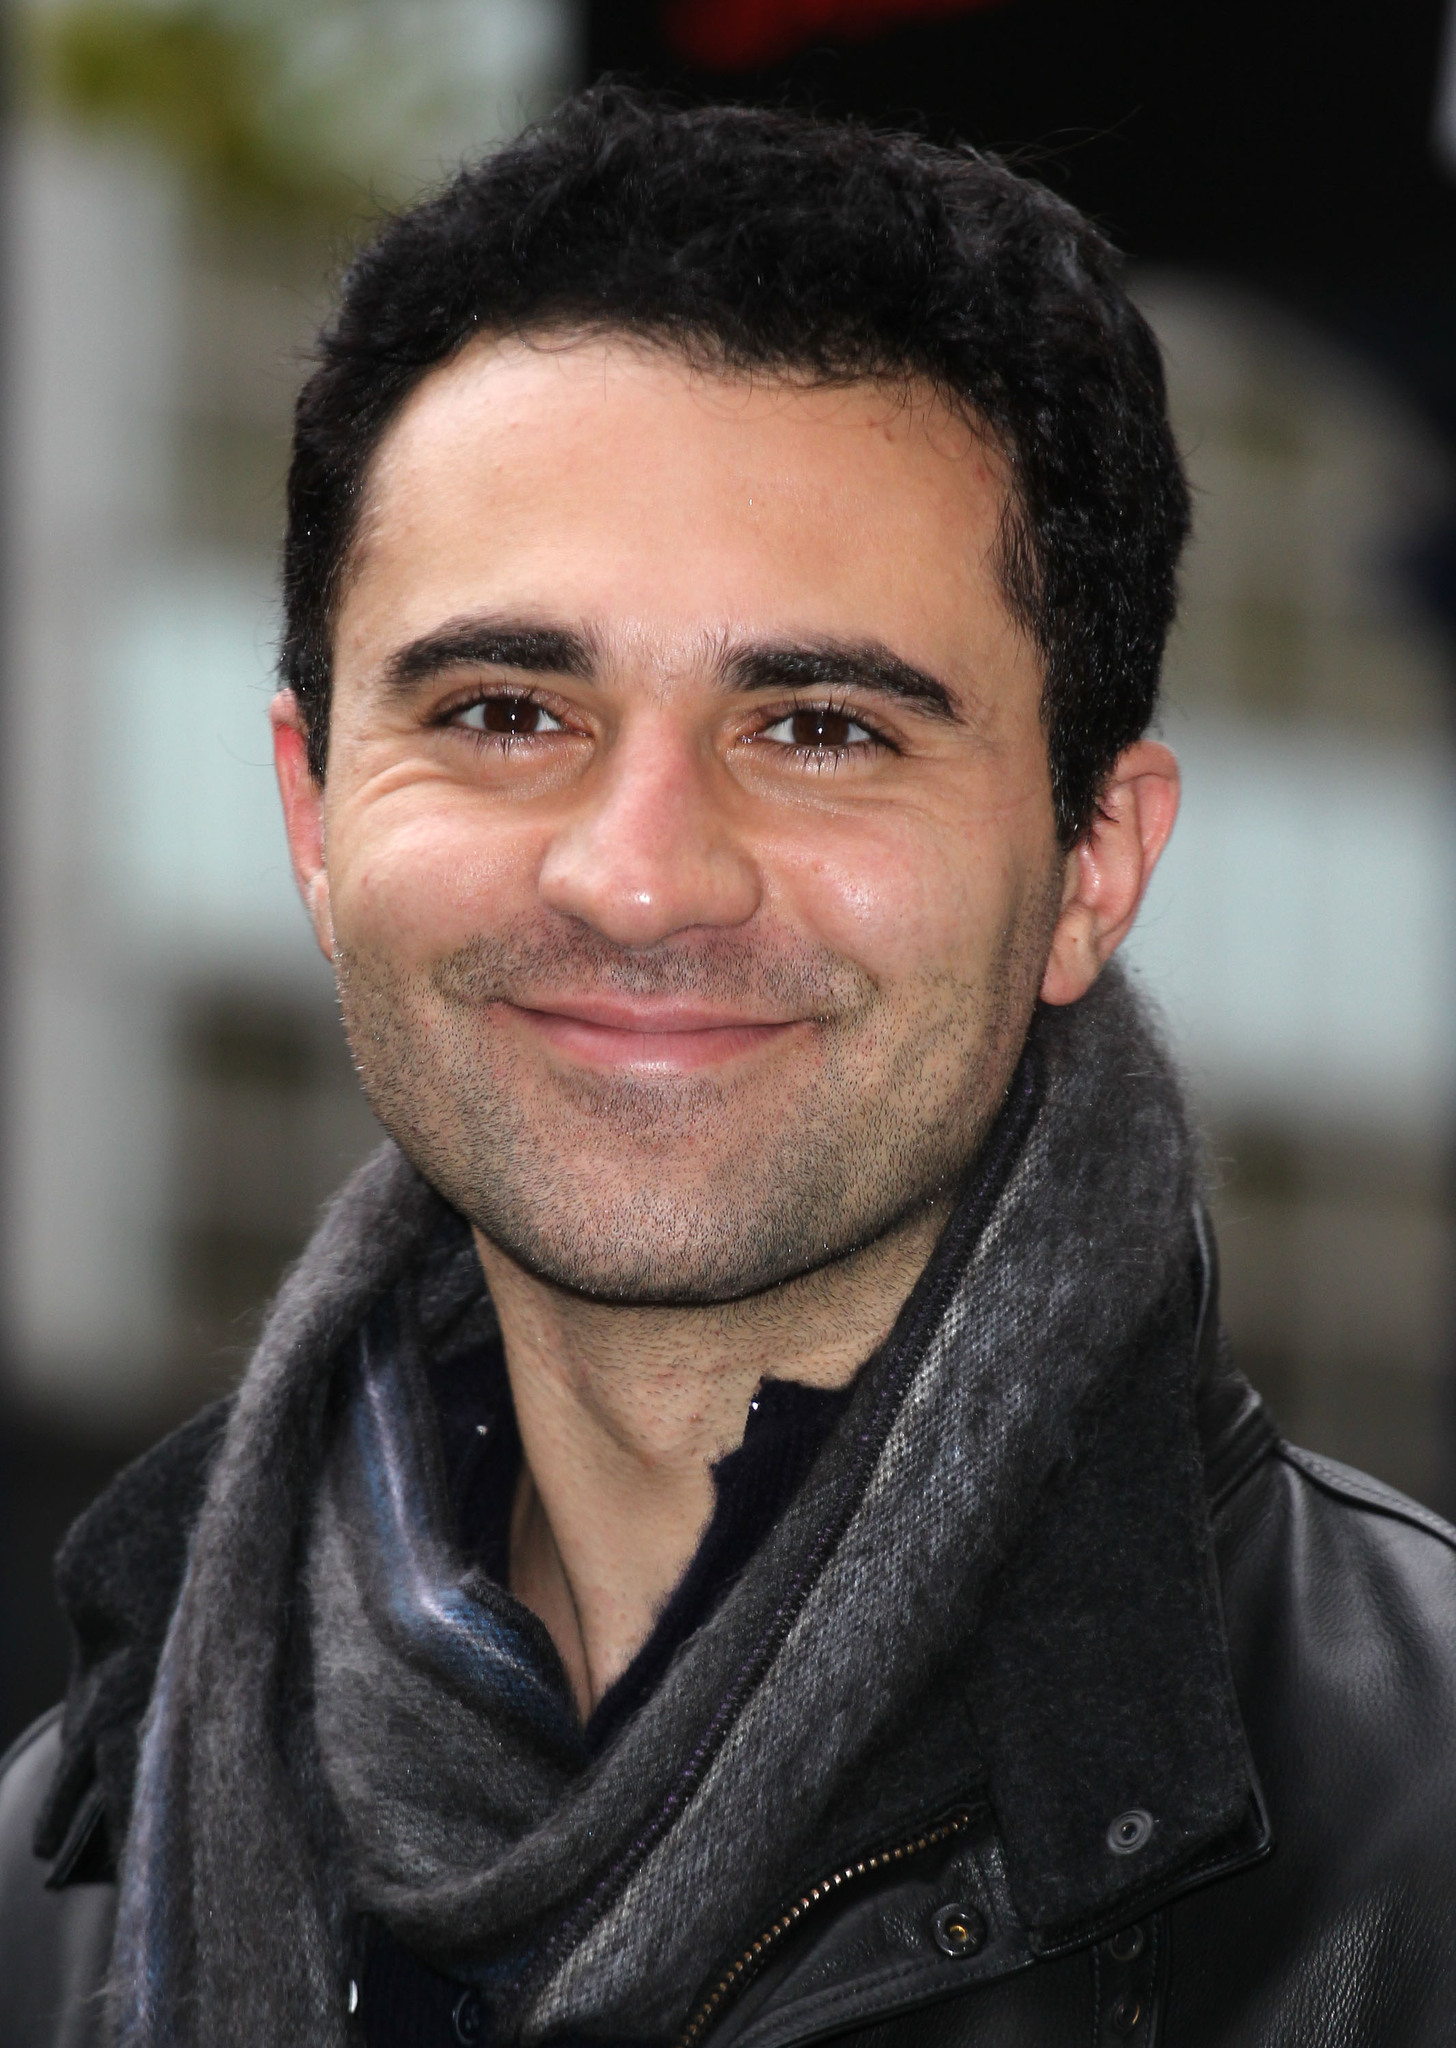 The Timeline Of Darius Campbell's Relationships, Dating, And Girlfriends!